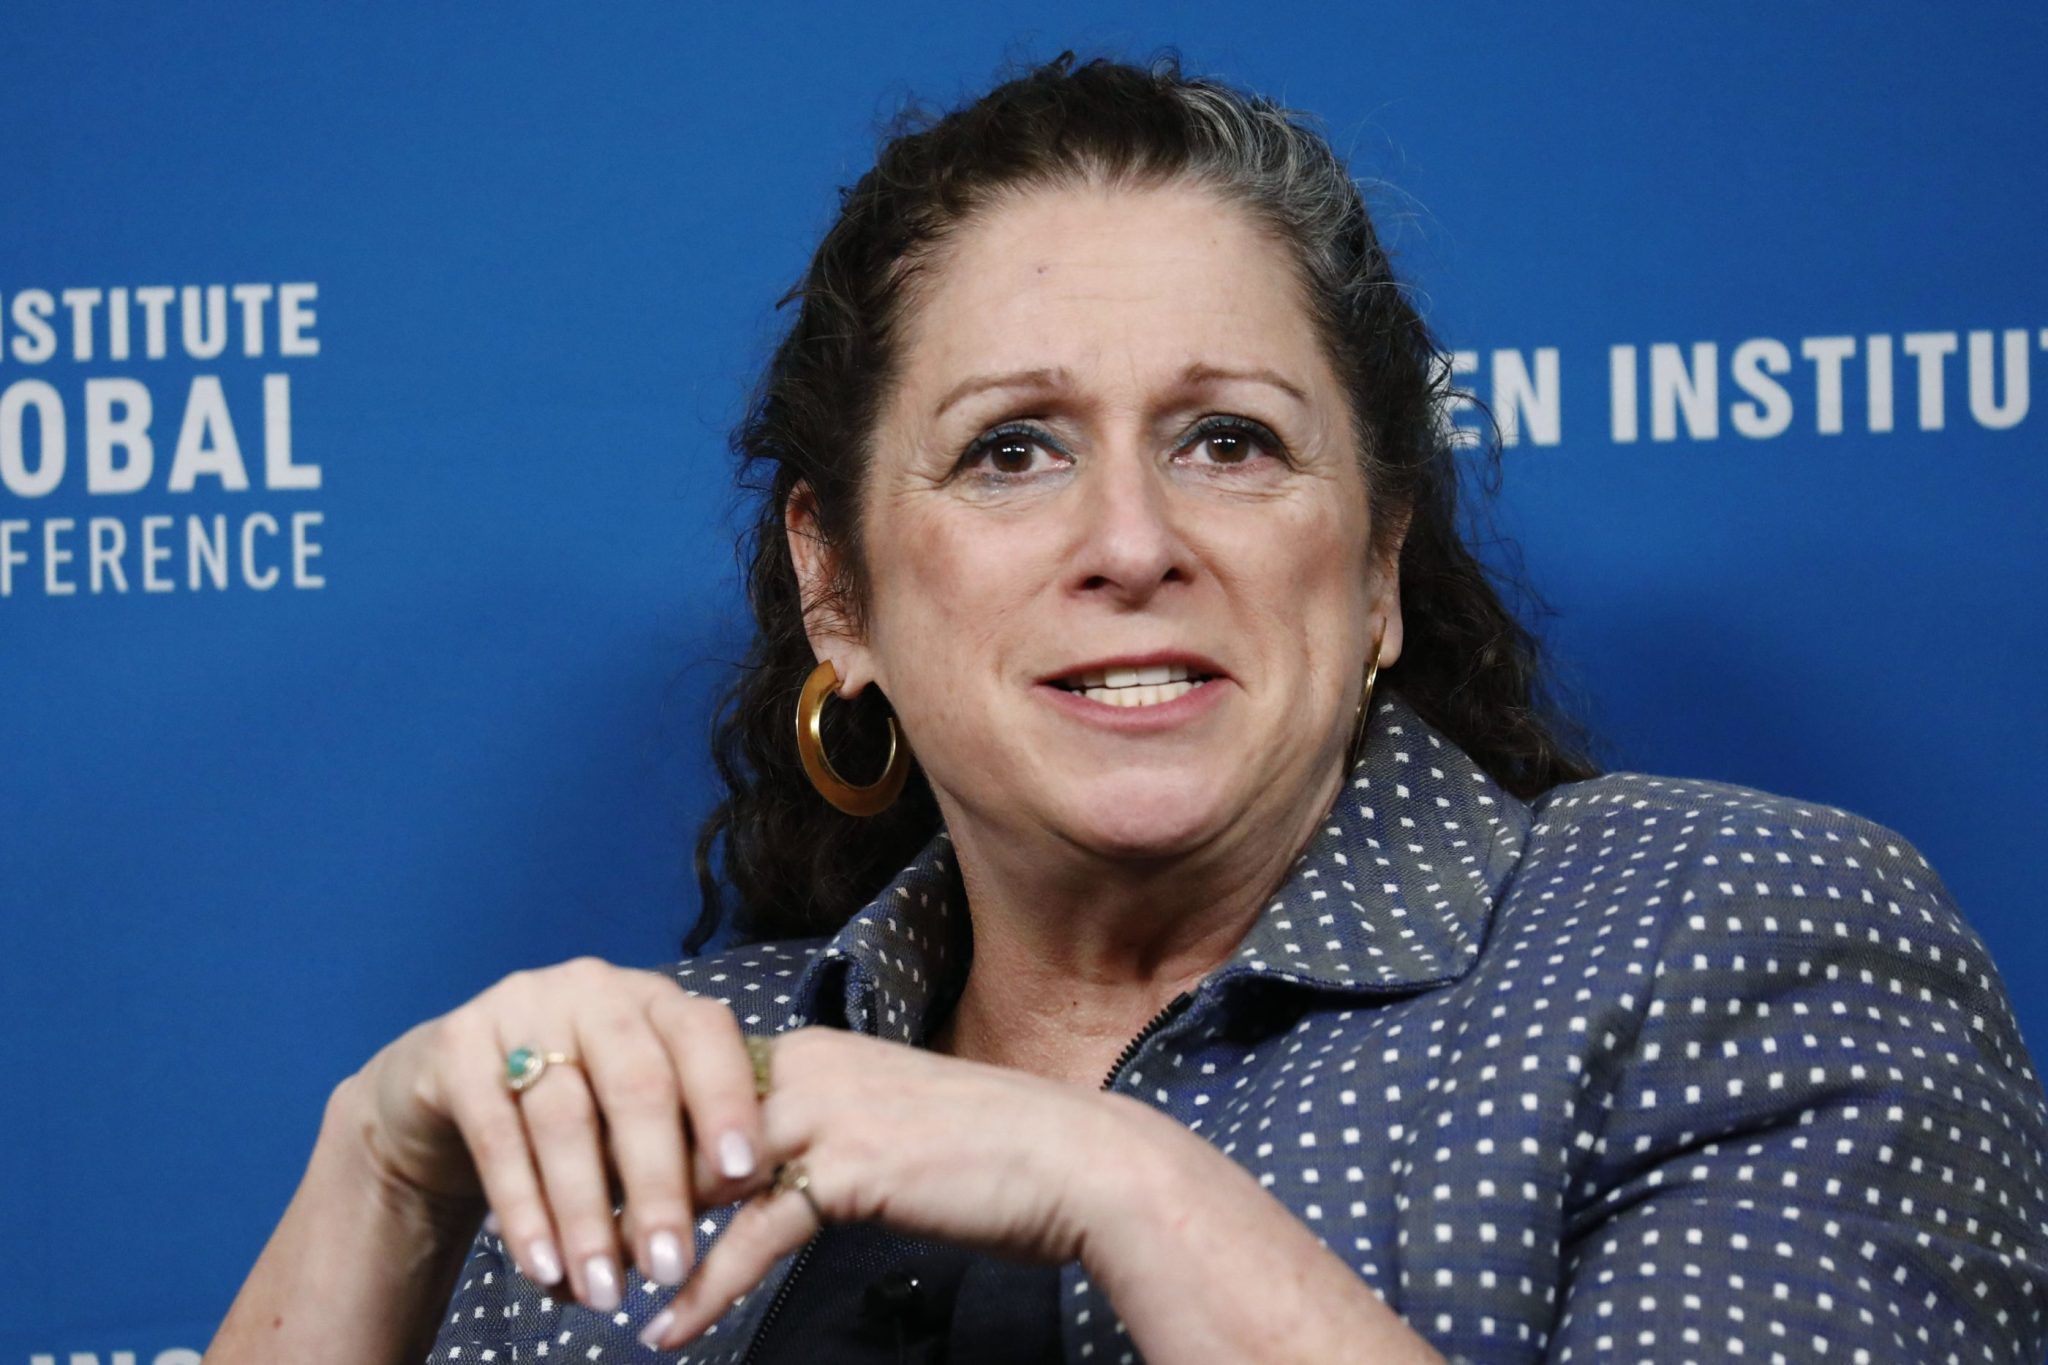 Heiress Abigail Disney Arrested For Chaining Herself